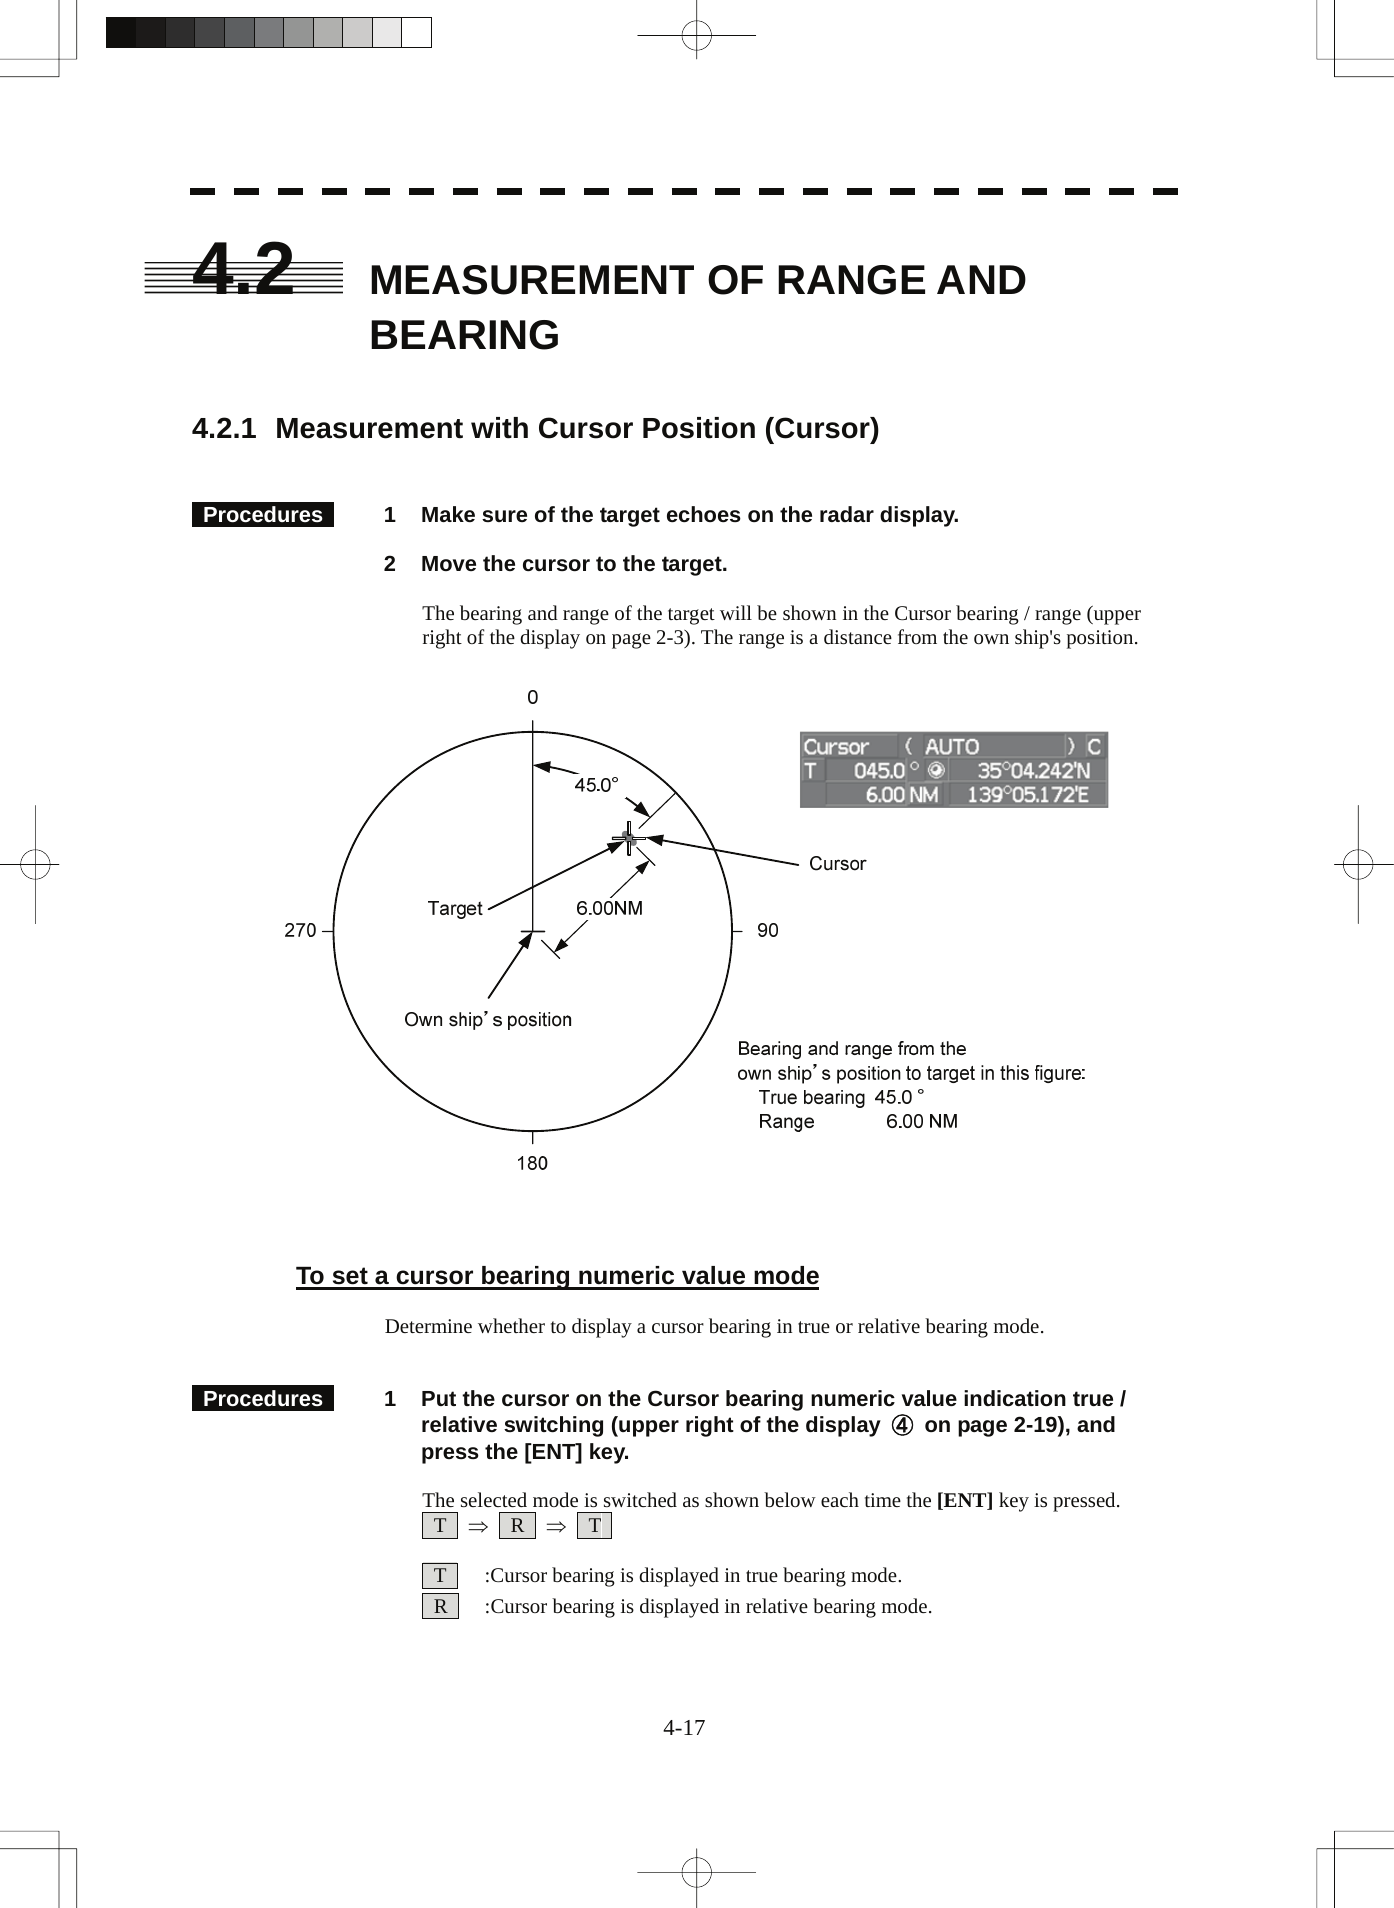  4.2  MEASUREMENT OF RANGE AND BEARING    4.2.1  Measurement with Cursor Position (Cursor)    Procedures   1  Make sure of the target echoes on the radar display.    2  Move the cursor to the target.  The bearing and range of the target will be shown in the Cursor bearing / range (upper right of the display on page 2-3). The range is a distance from the own ship&apos;s position.      To set a cursor bearing numeric value mode  Determine whether to display a cursor bearing in true or relative bearing mode.    Procedures   1  Put the cursor on the Cursor bearing numeric value indication true / relative switching (upper right of the display  ④  on page 2-19), and press the [ENT] key.  The selected mode is switched as shown below each time the [ENT] key is pressed.  T  ⇒  R  ⇒  T     T    :Cursor bearing is displayed in true bearing mode.   R    :Cursor bearing is displayed in relative bearing mode.  4-17 